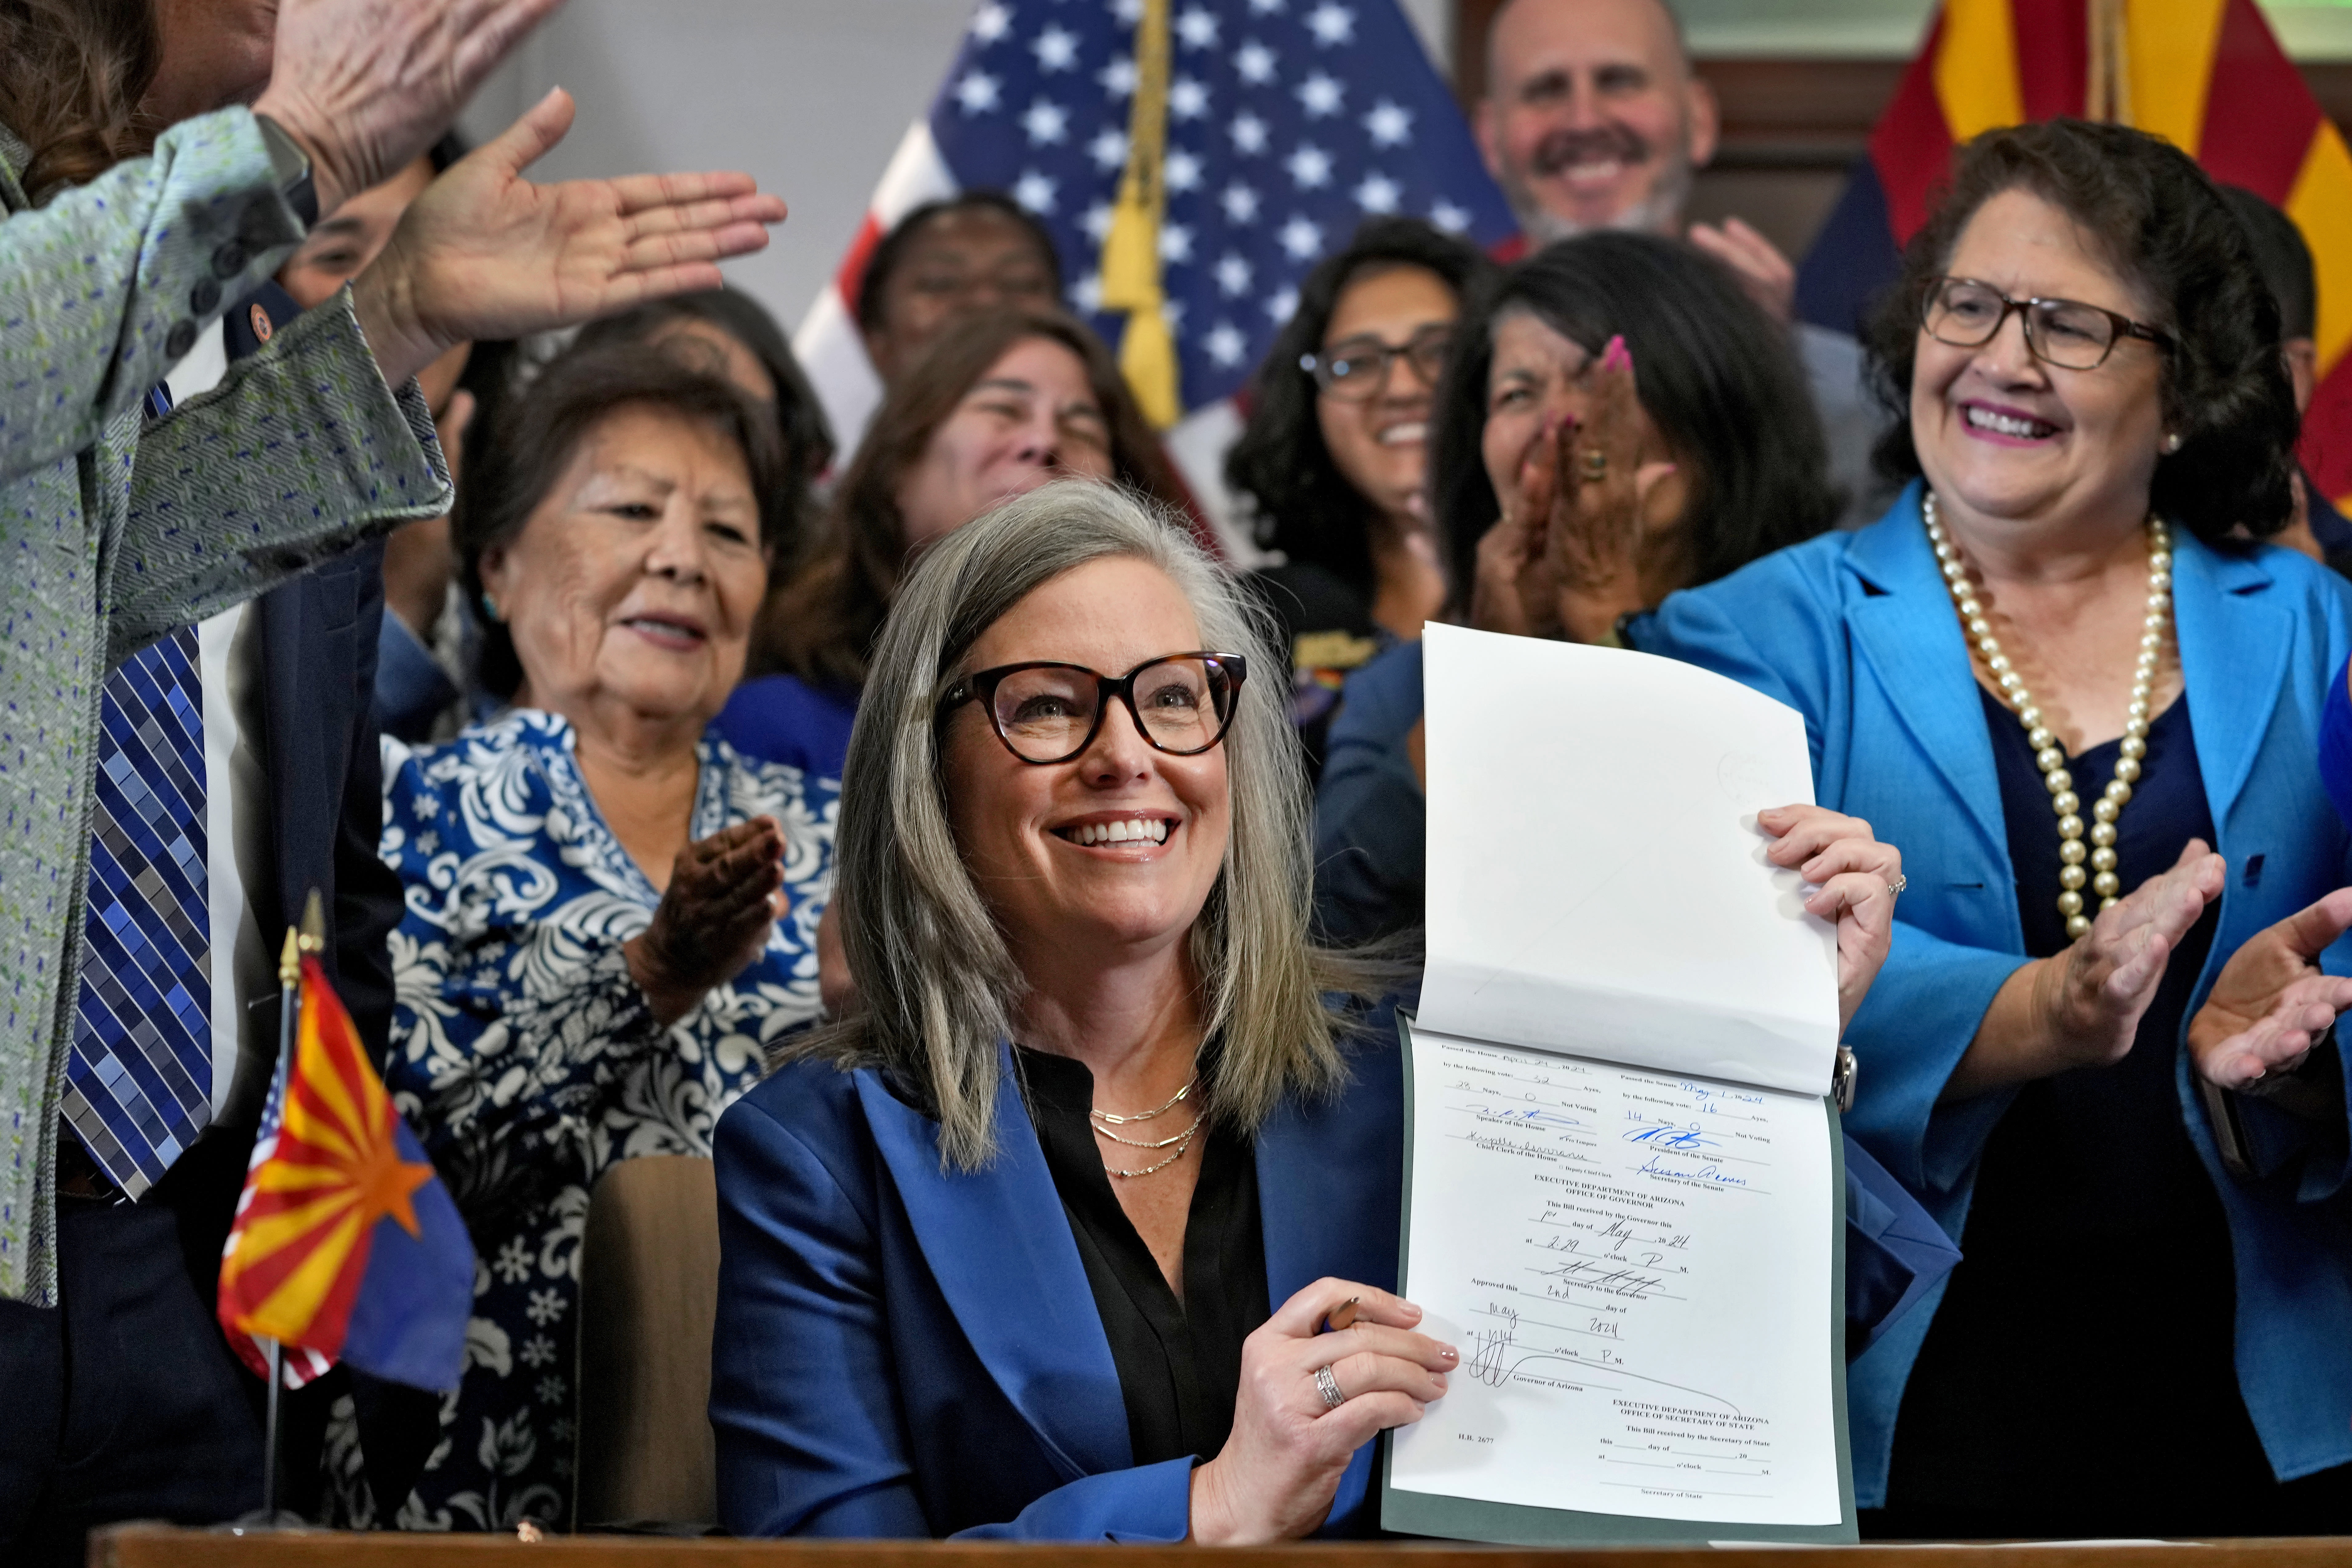 Arizona's high court is allowing the attorney general 90 more days on her abortion ban strategy